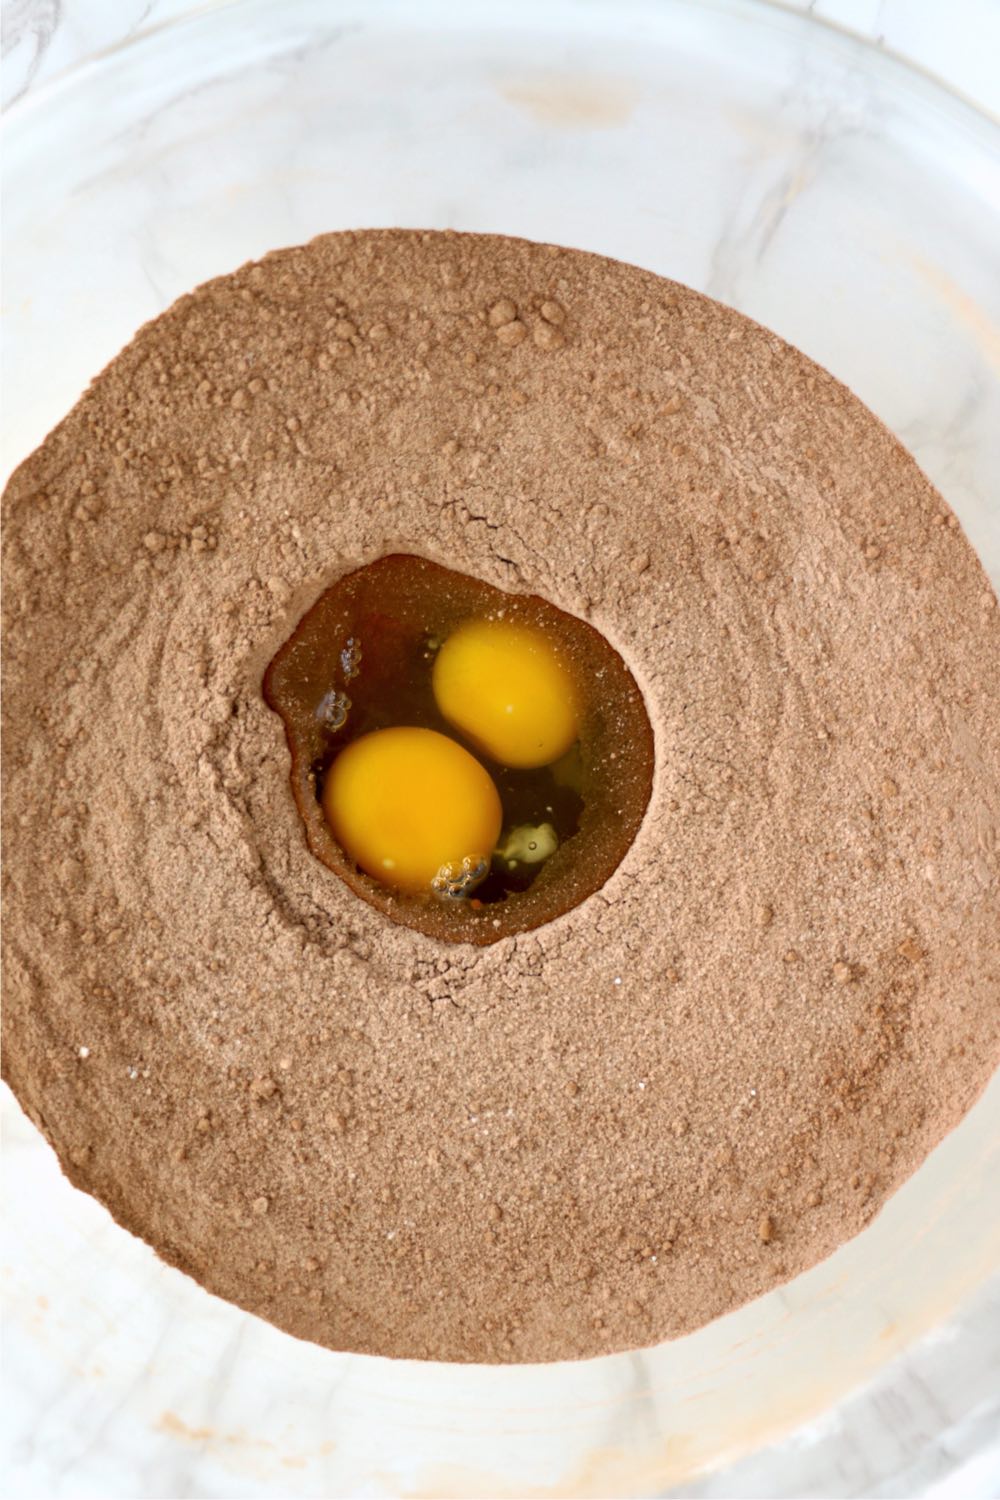 Well of eggs within dry ingredients in bowl